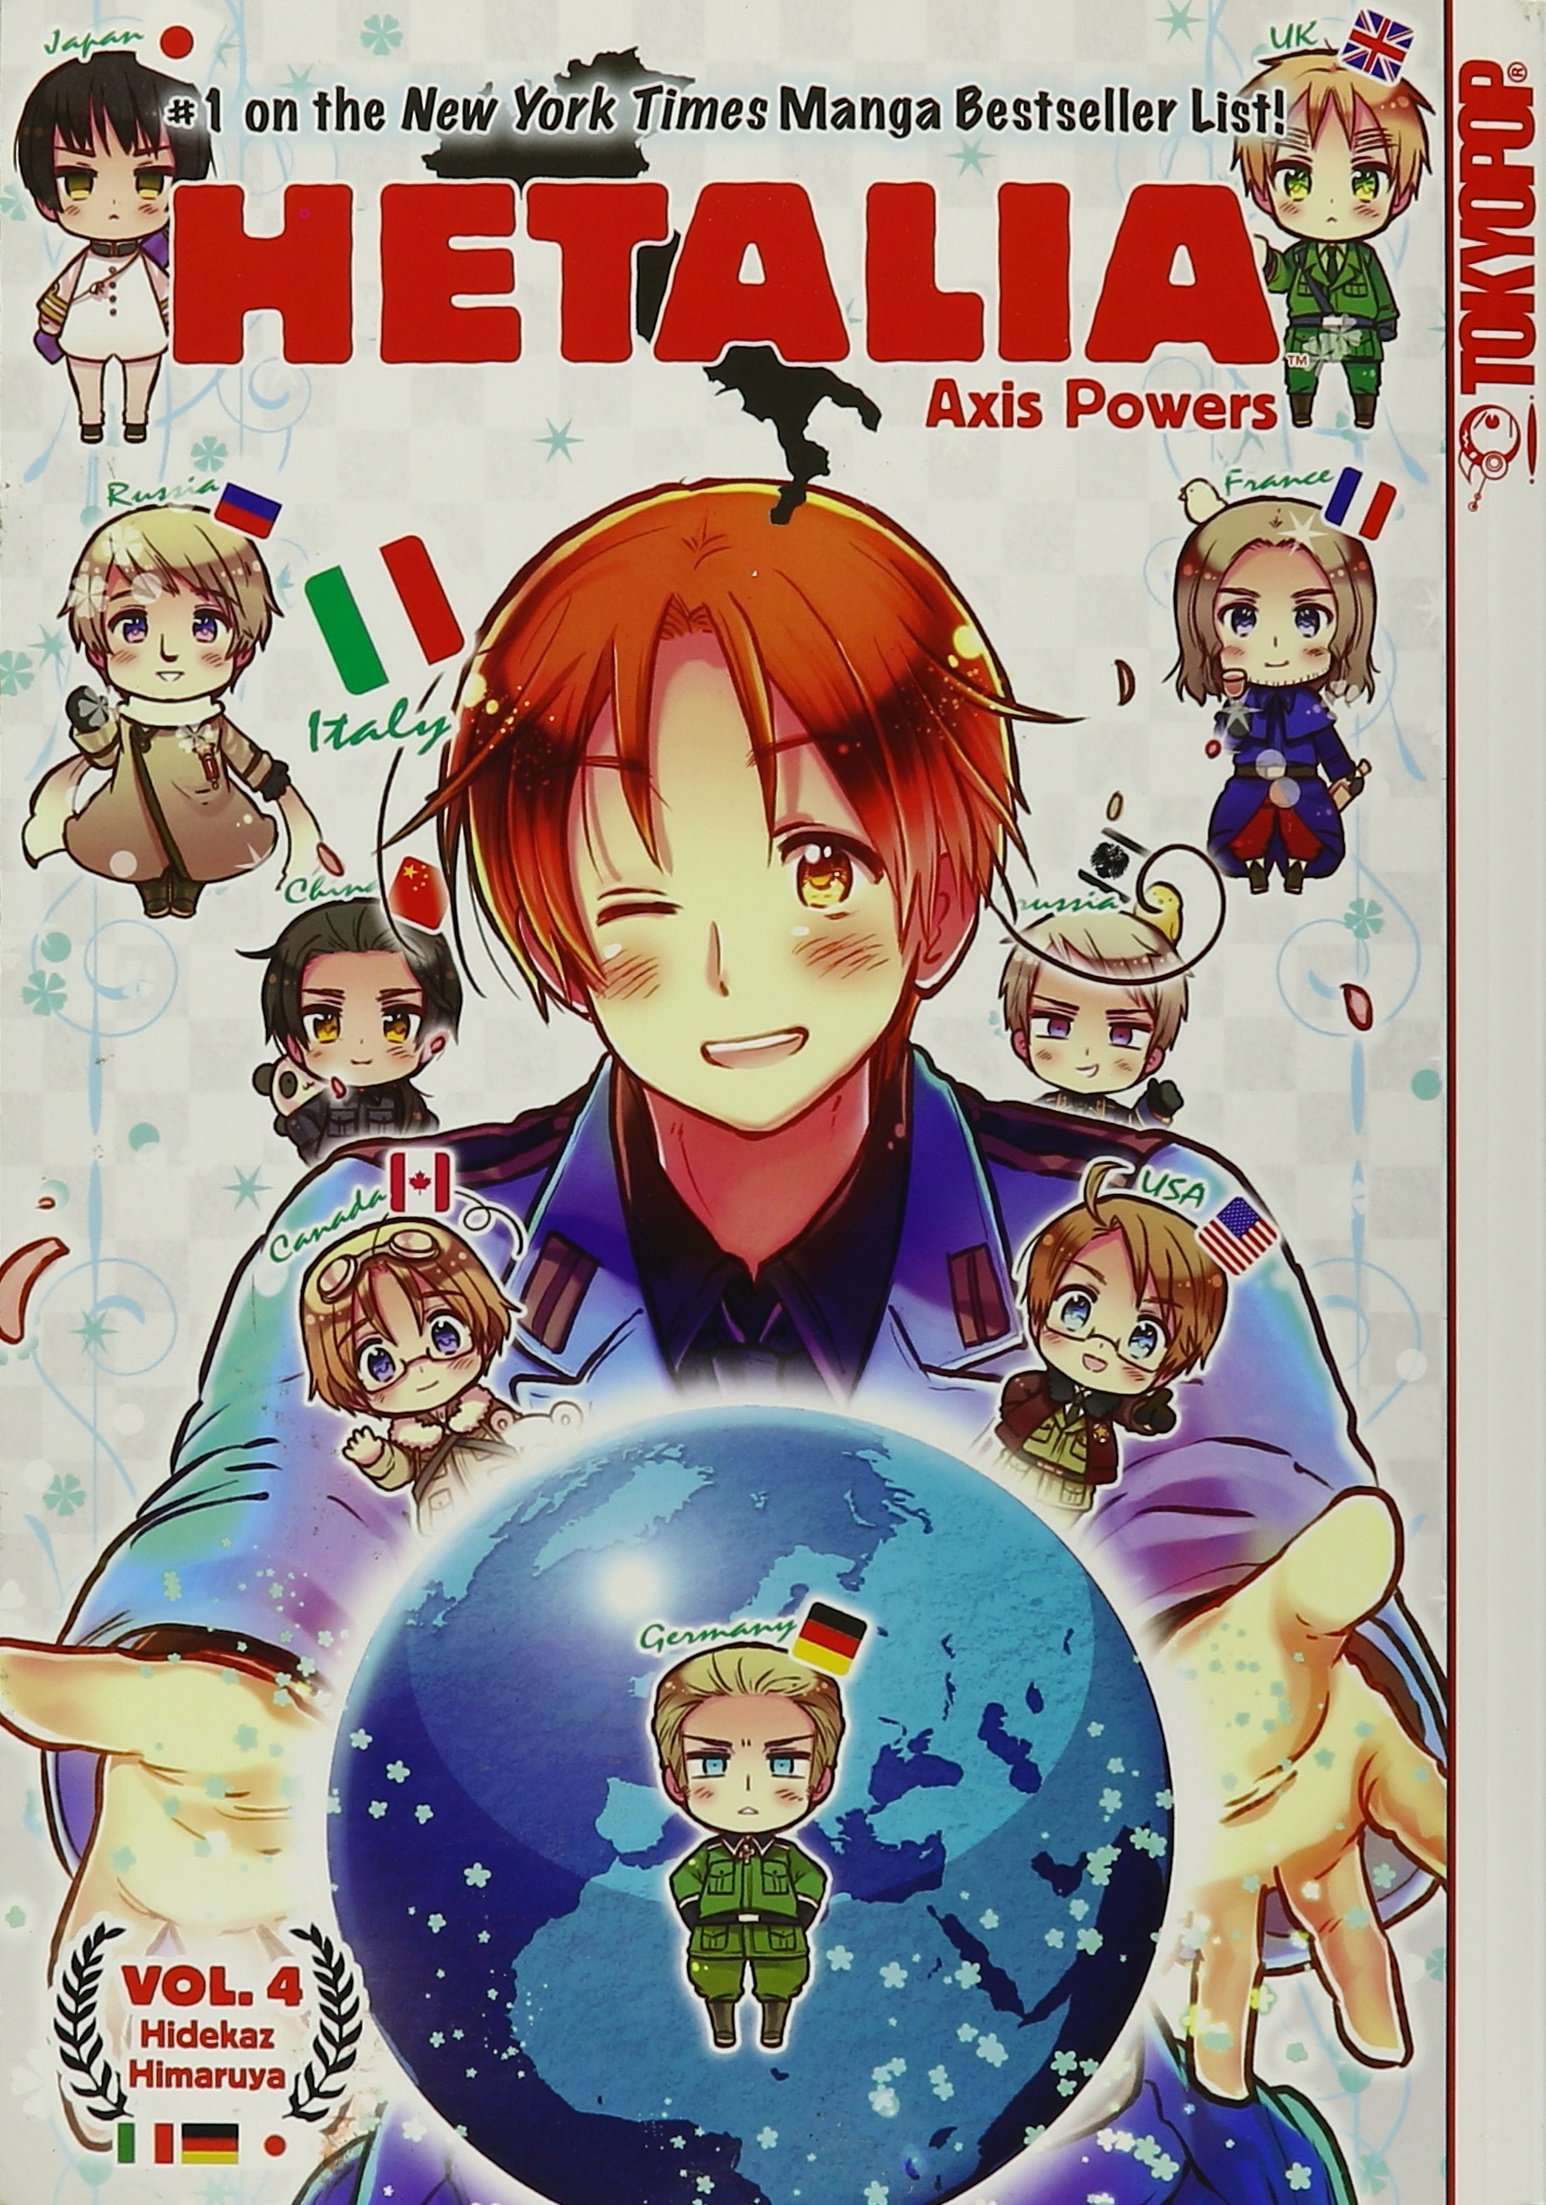 Suggestions About The Quit Of The Hetalia: Axis Powers World Meeting Scene